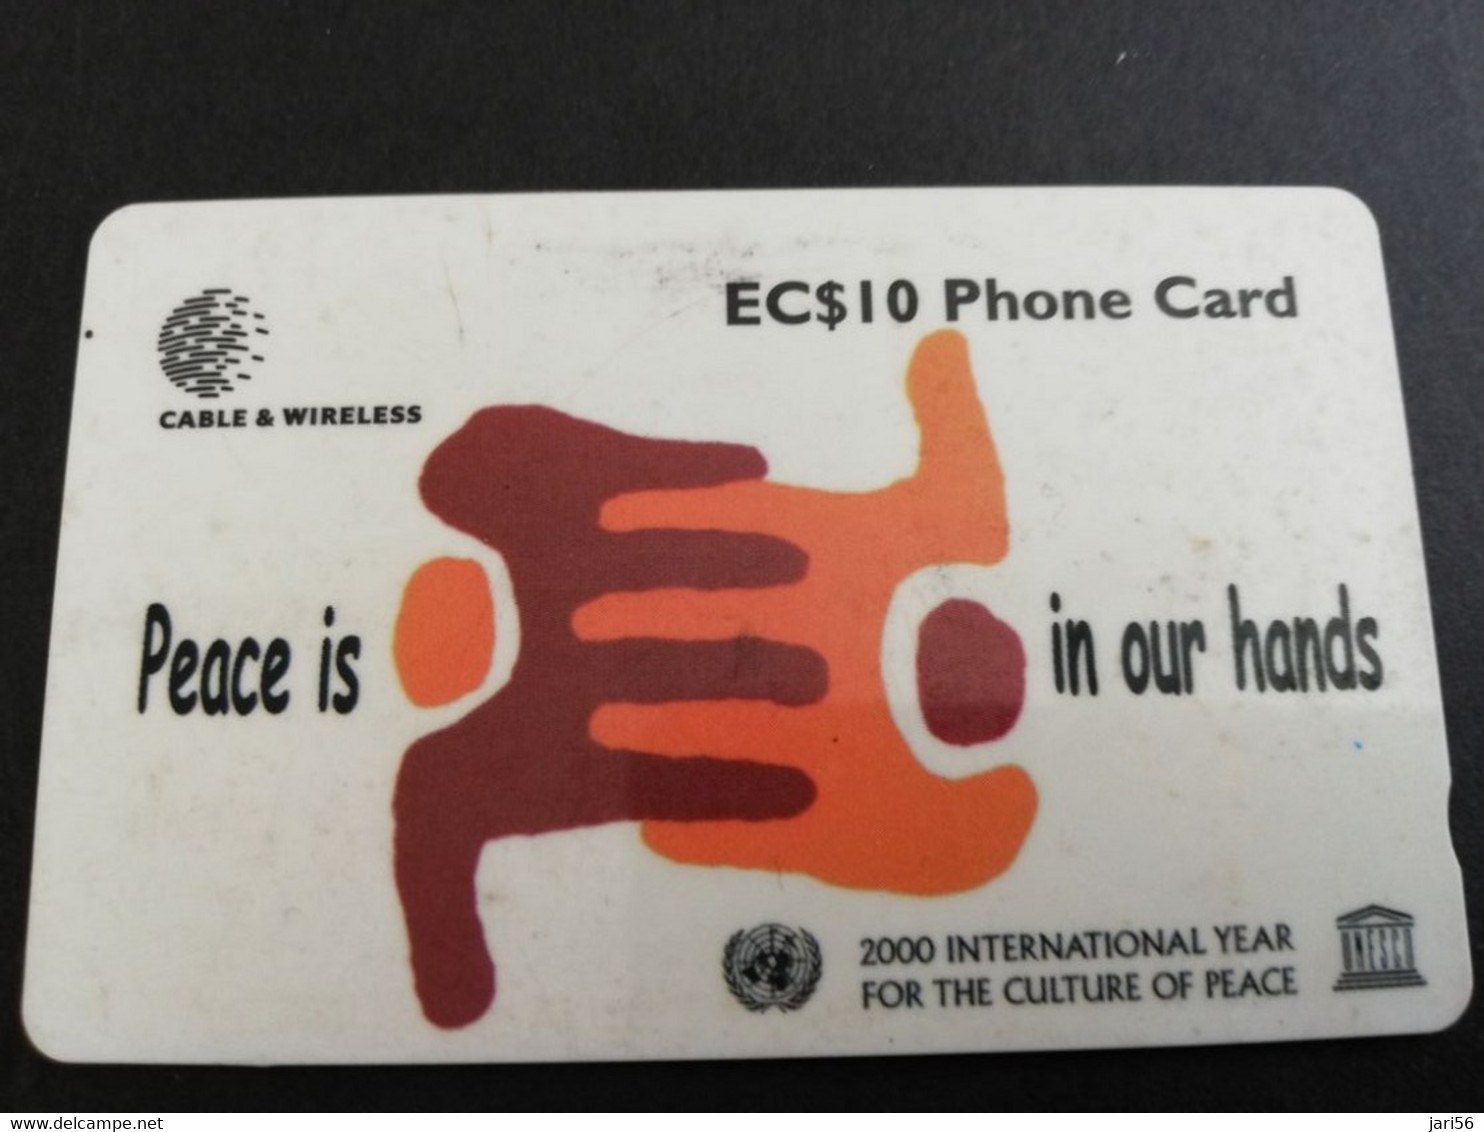 ST LUCIA    $ 10  CABLE & WIRELESS   PEACE IN OUR HANDS   338CSLB   Fine Used Card ** 5305** - Sainte Lucie